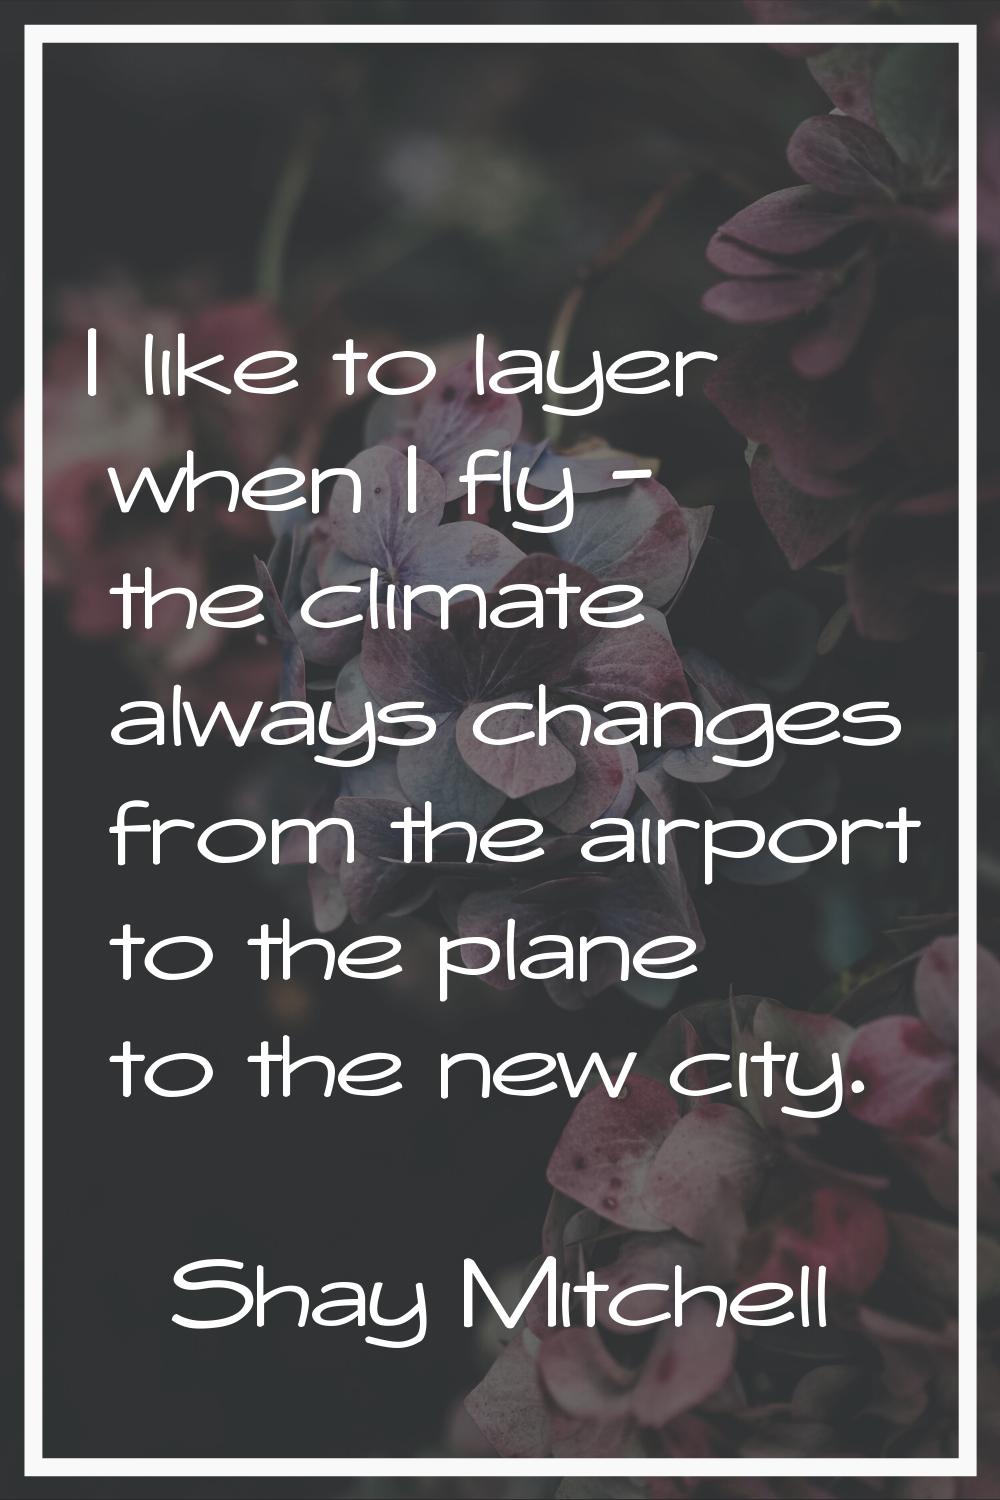 I like to layer when I fly - the climate always changes from the airport to the plane to the new ci